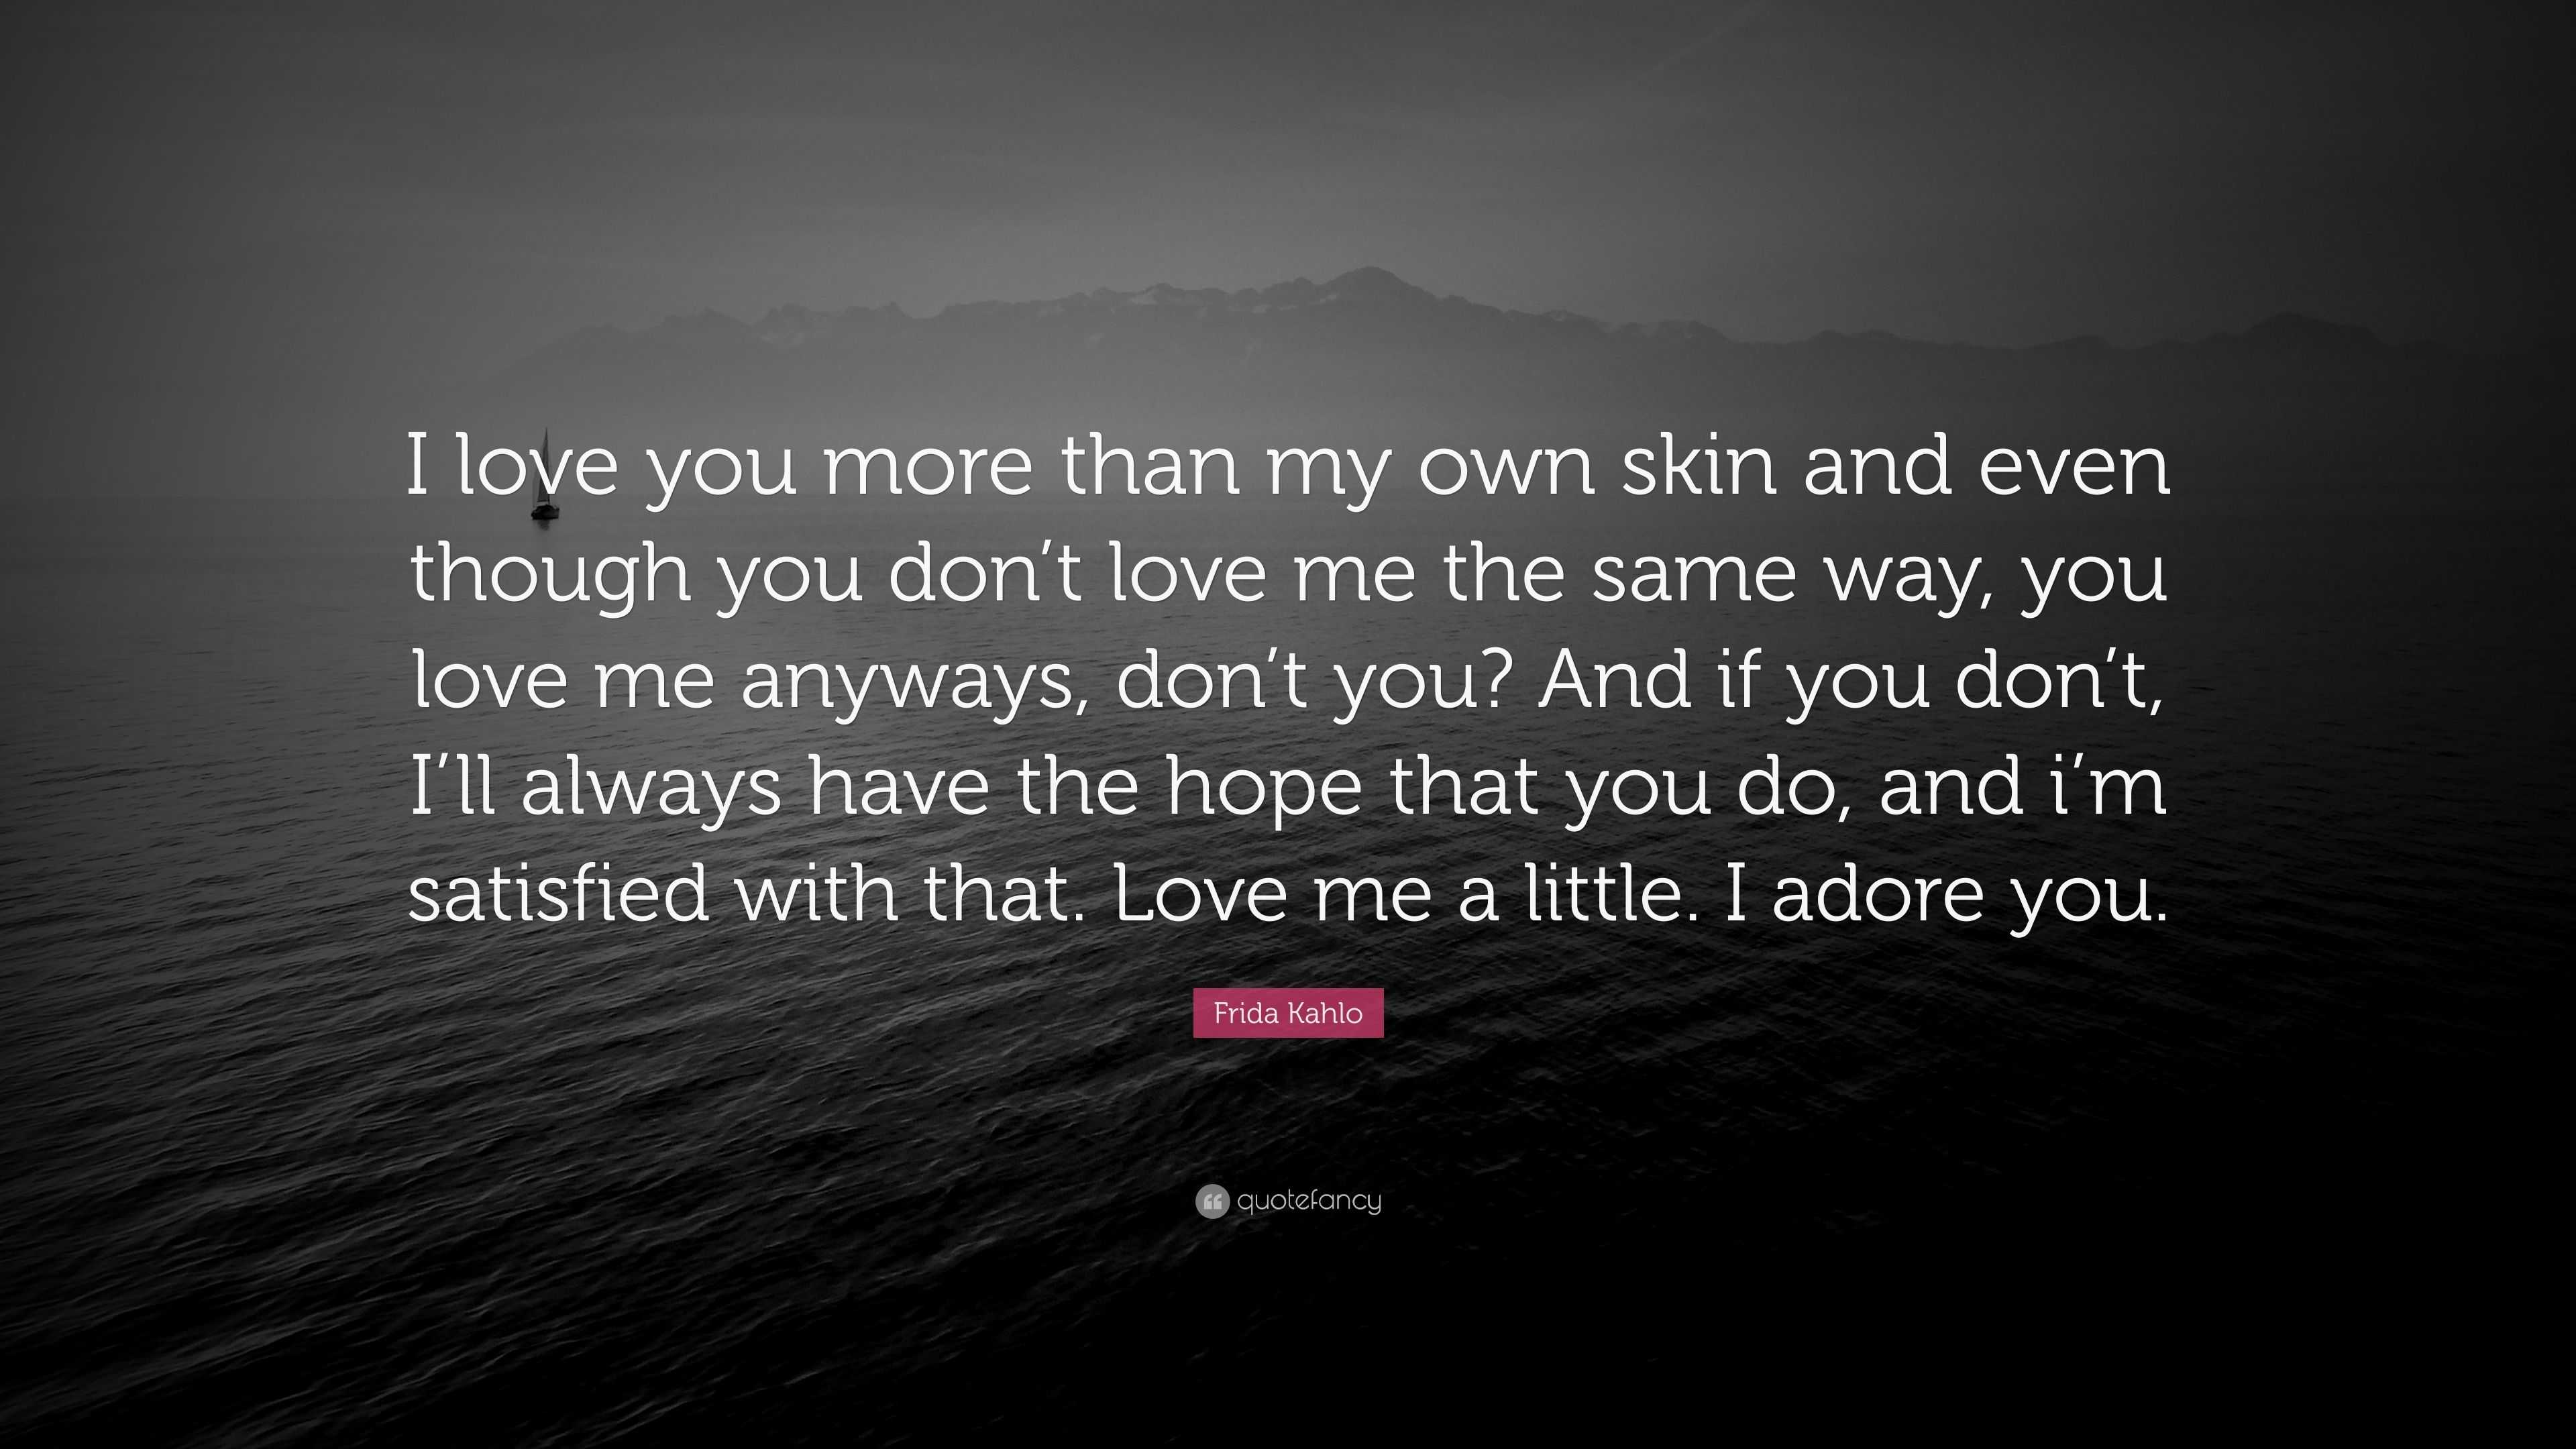 Frida Kahlo Quote I Love You More Than My Own Skin And Even Though You Don T Love Me The Same Way You Love Me Anyways Don T You And If